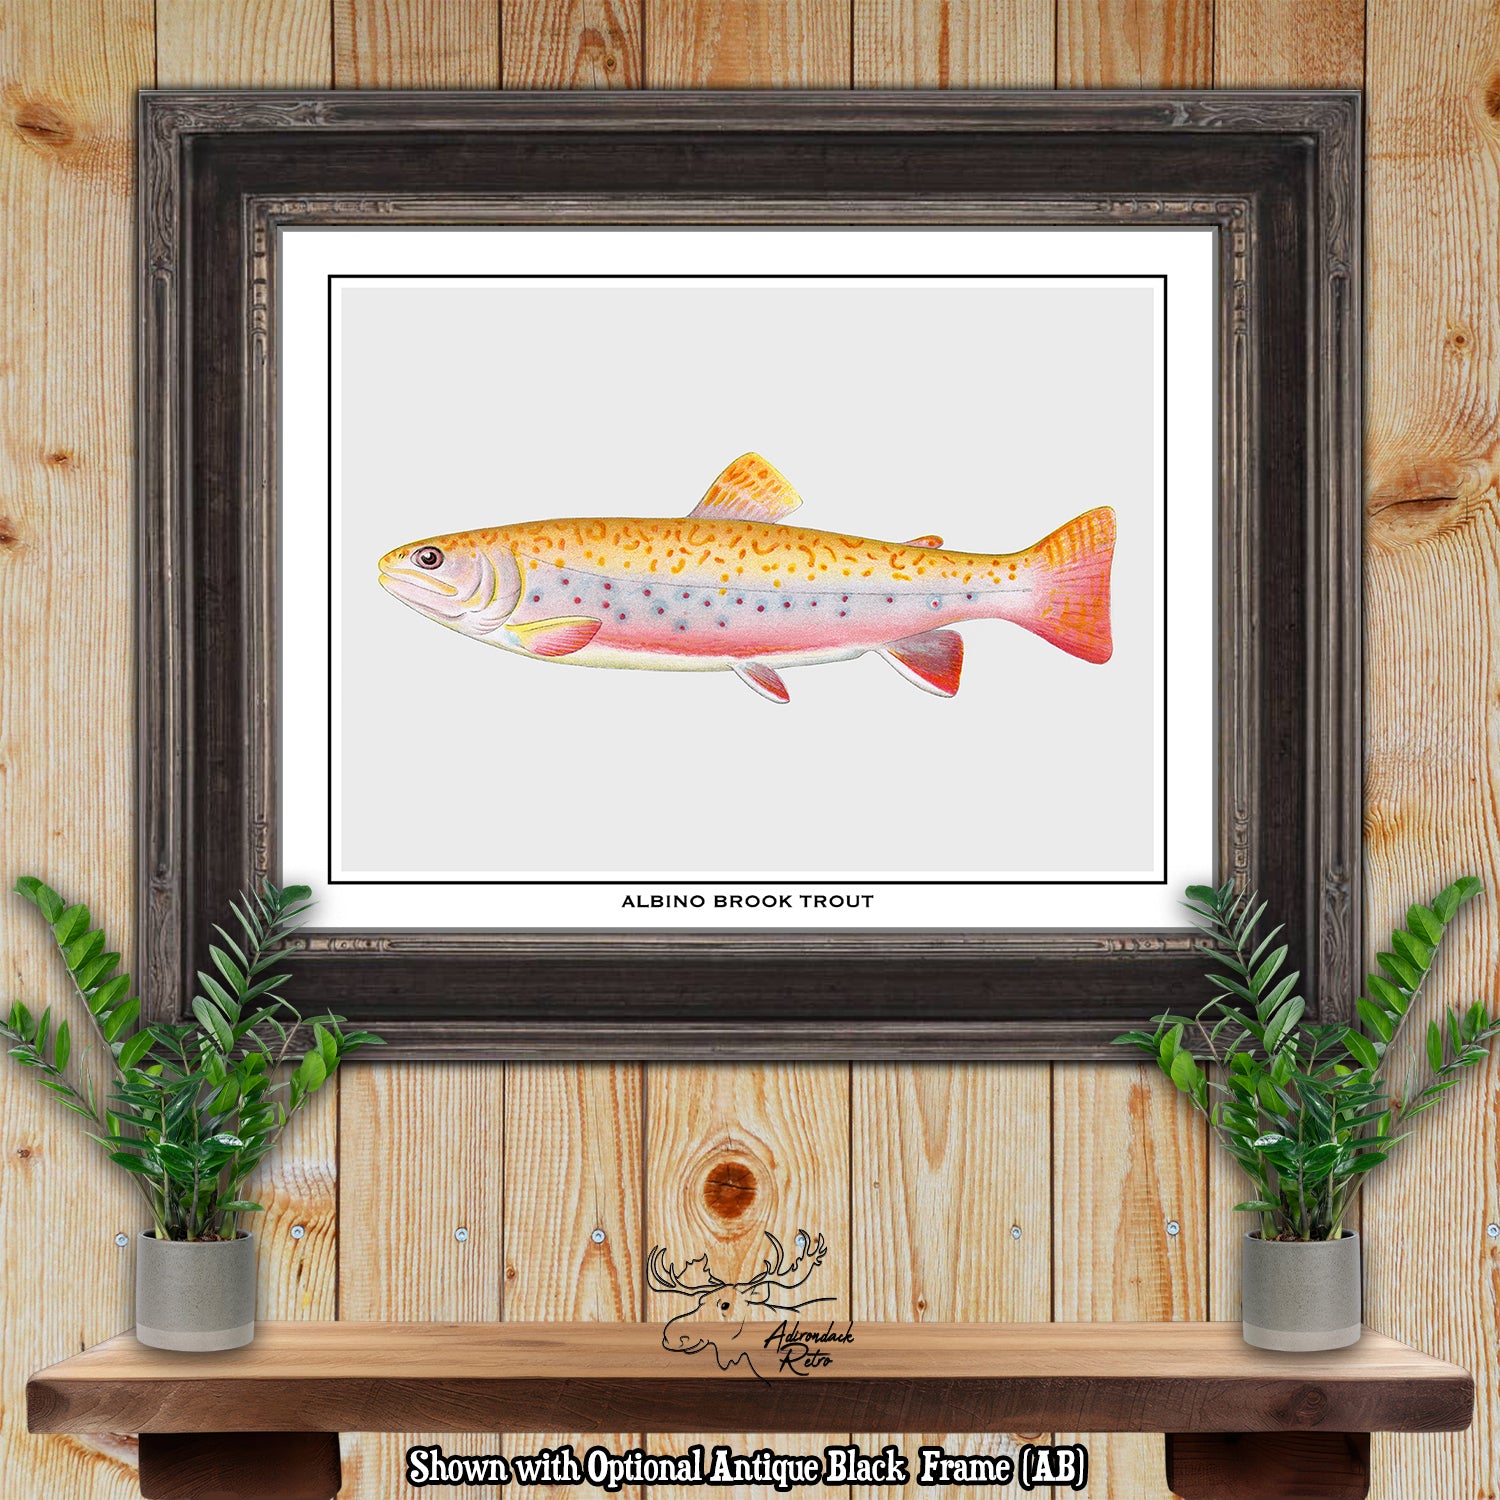 a picture of a fish in a frame on a wall